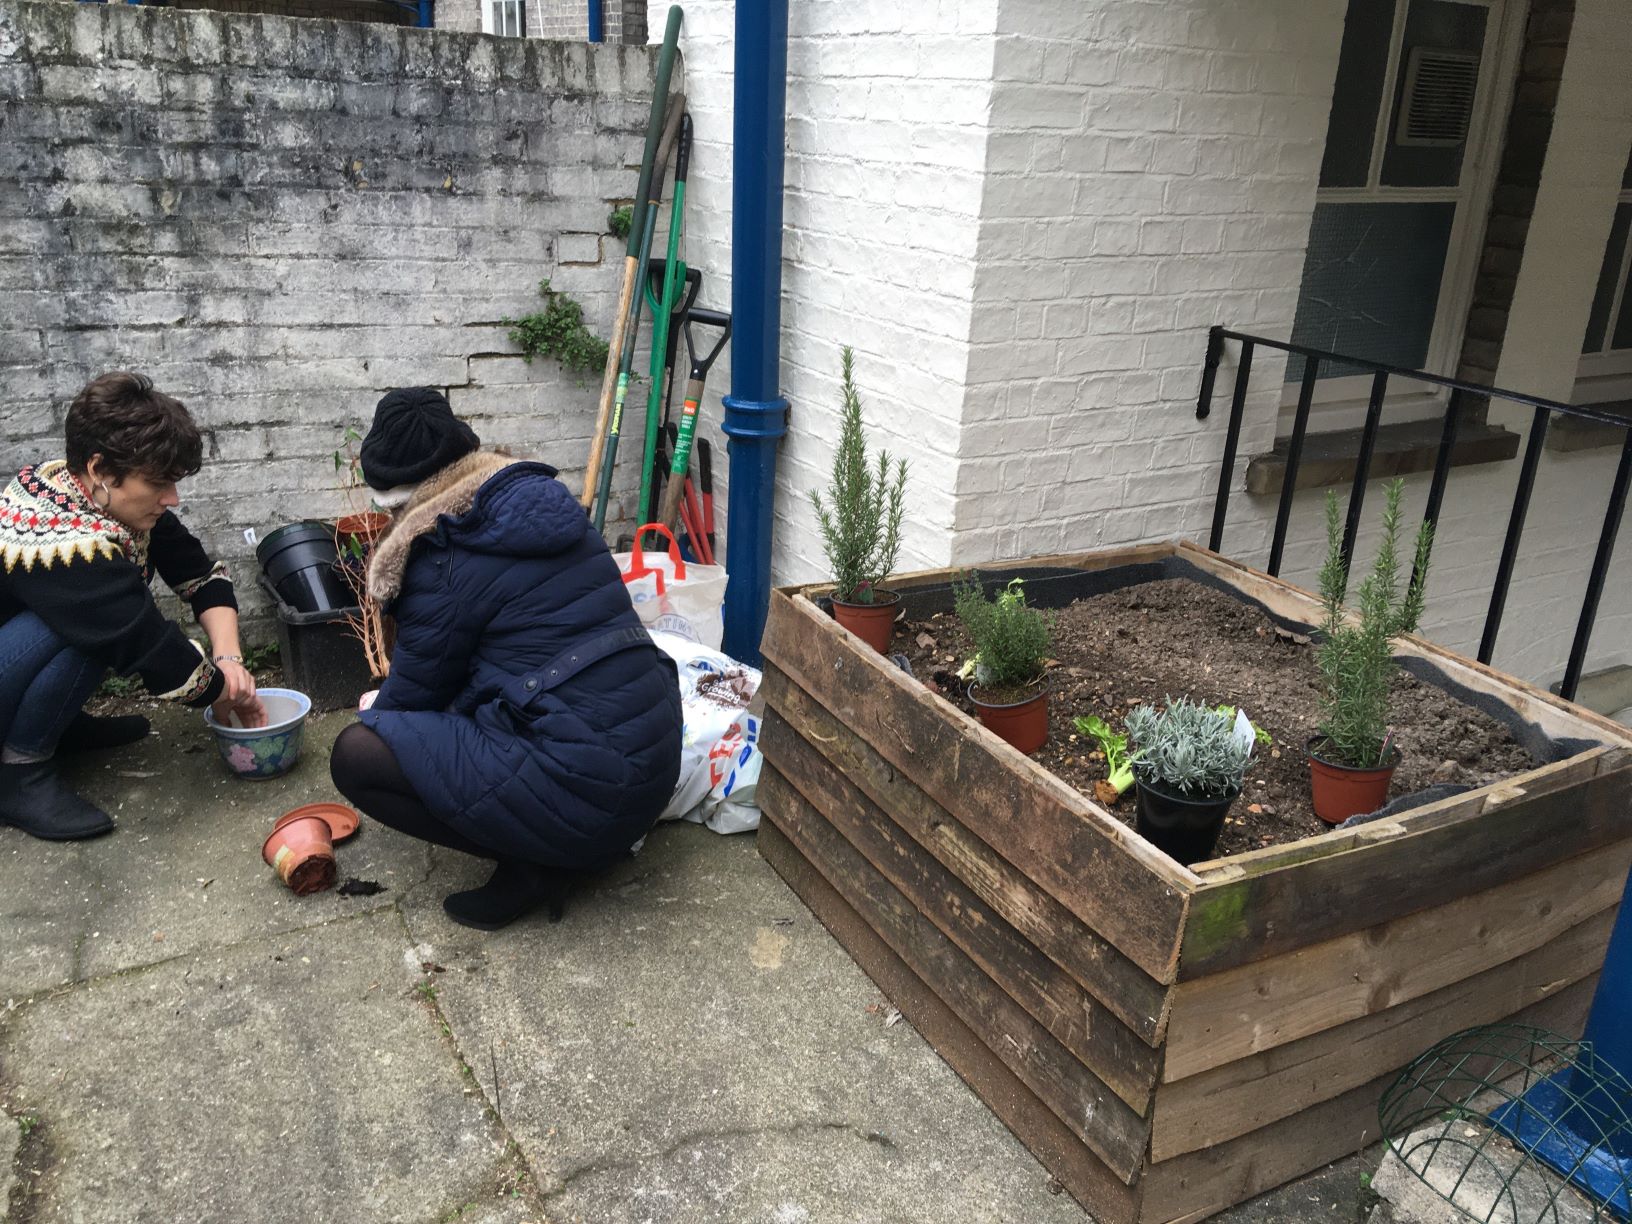 Improving the courtyard